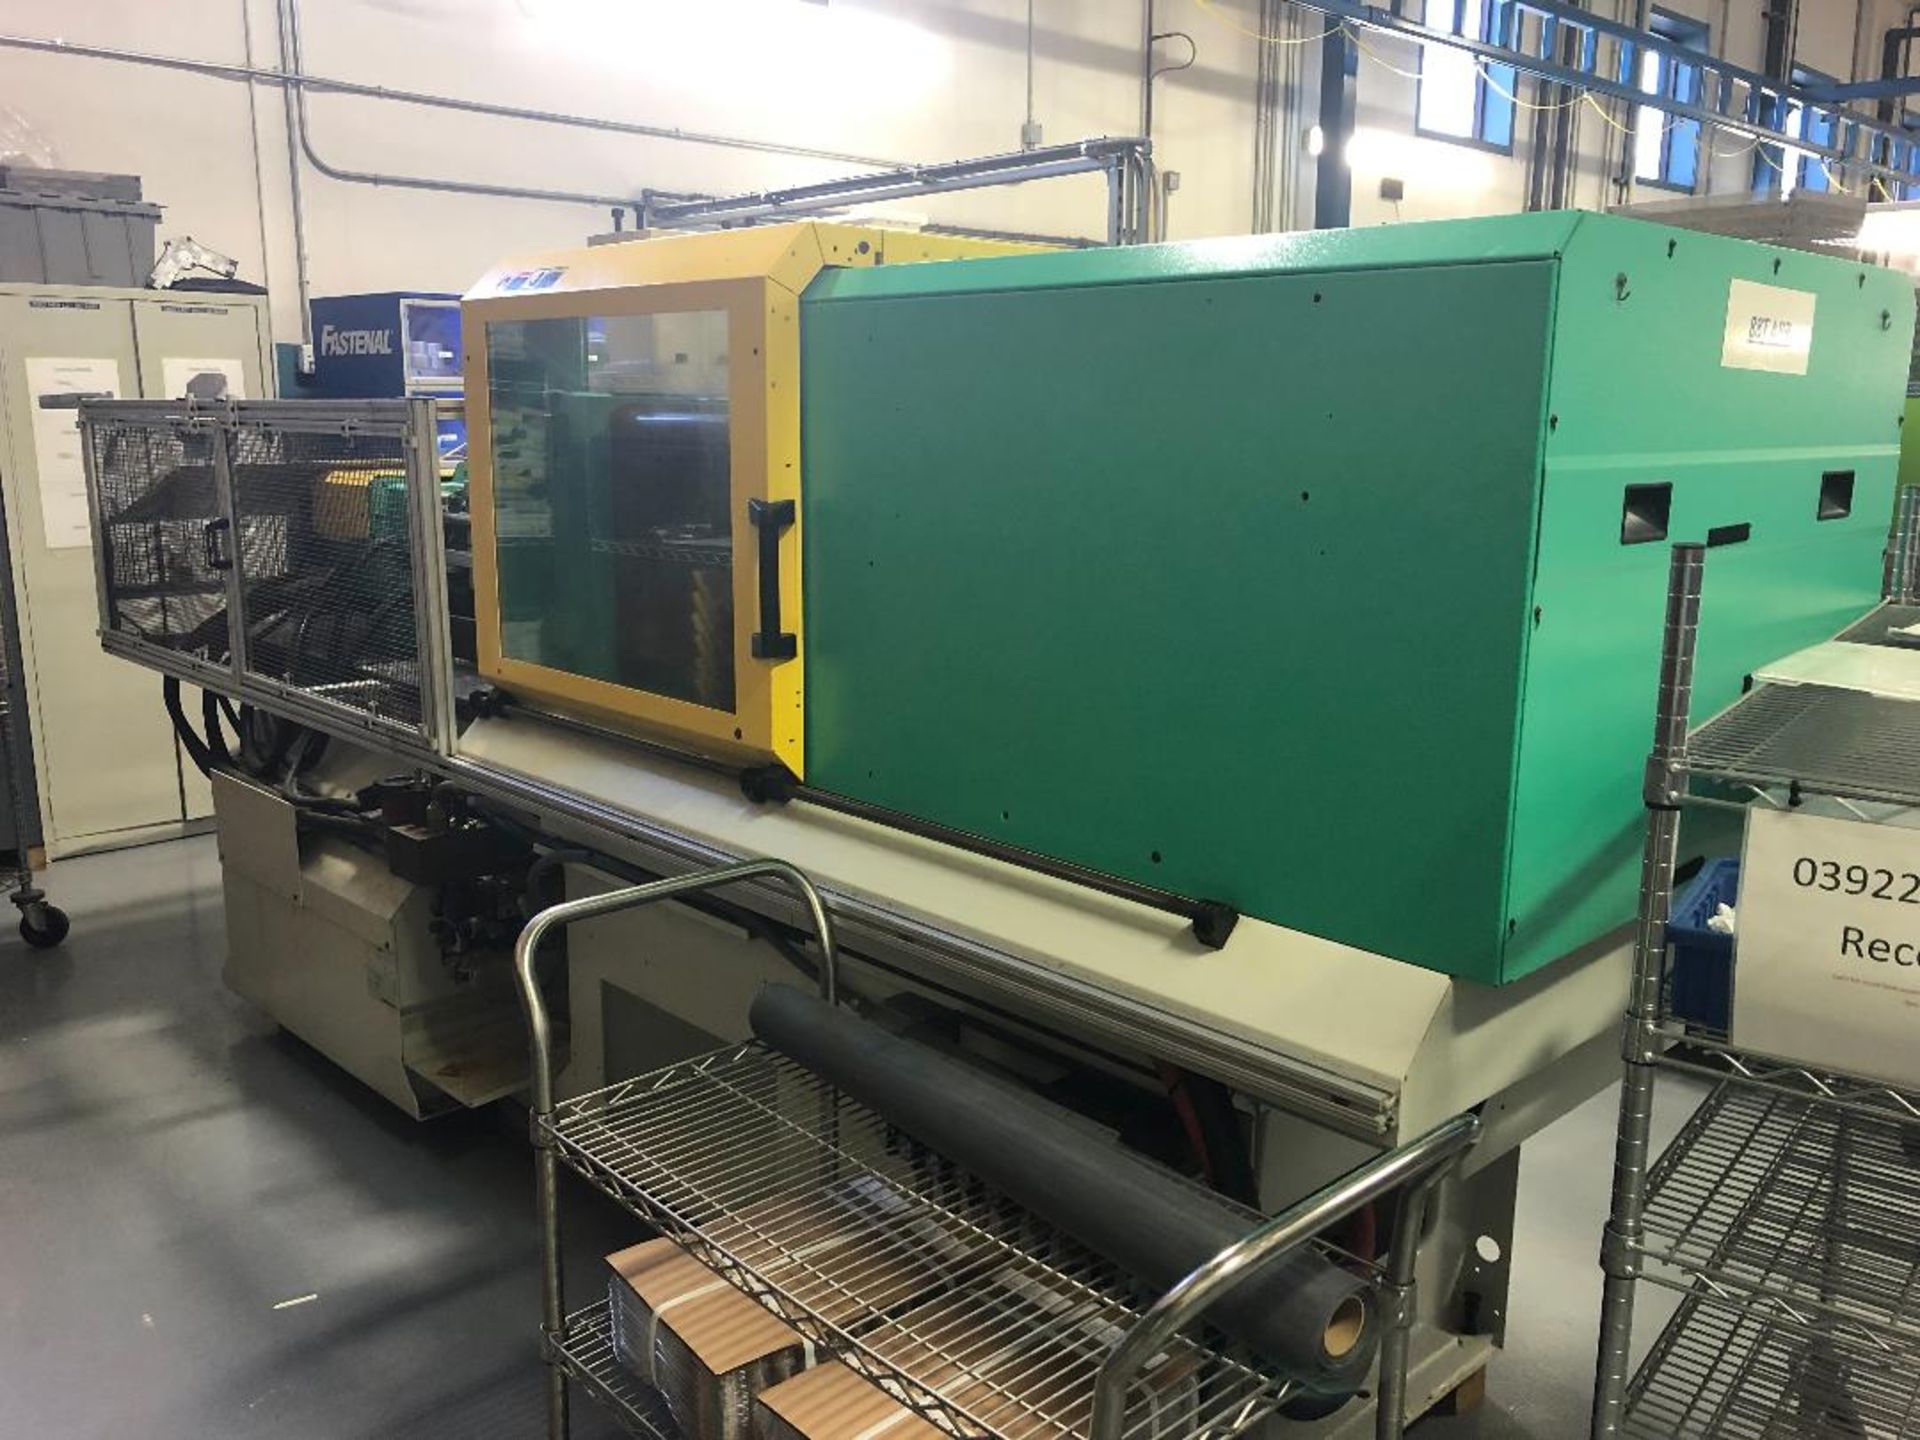 Arburg 88 Ton Injection Molding Press, New in 2004 - Image 3 of 8